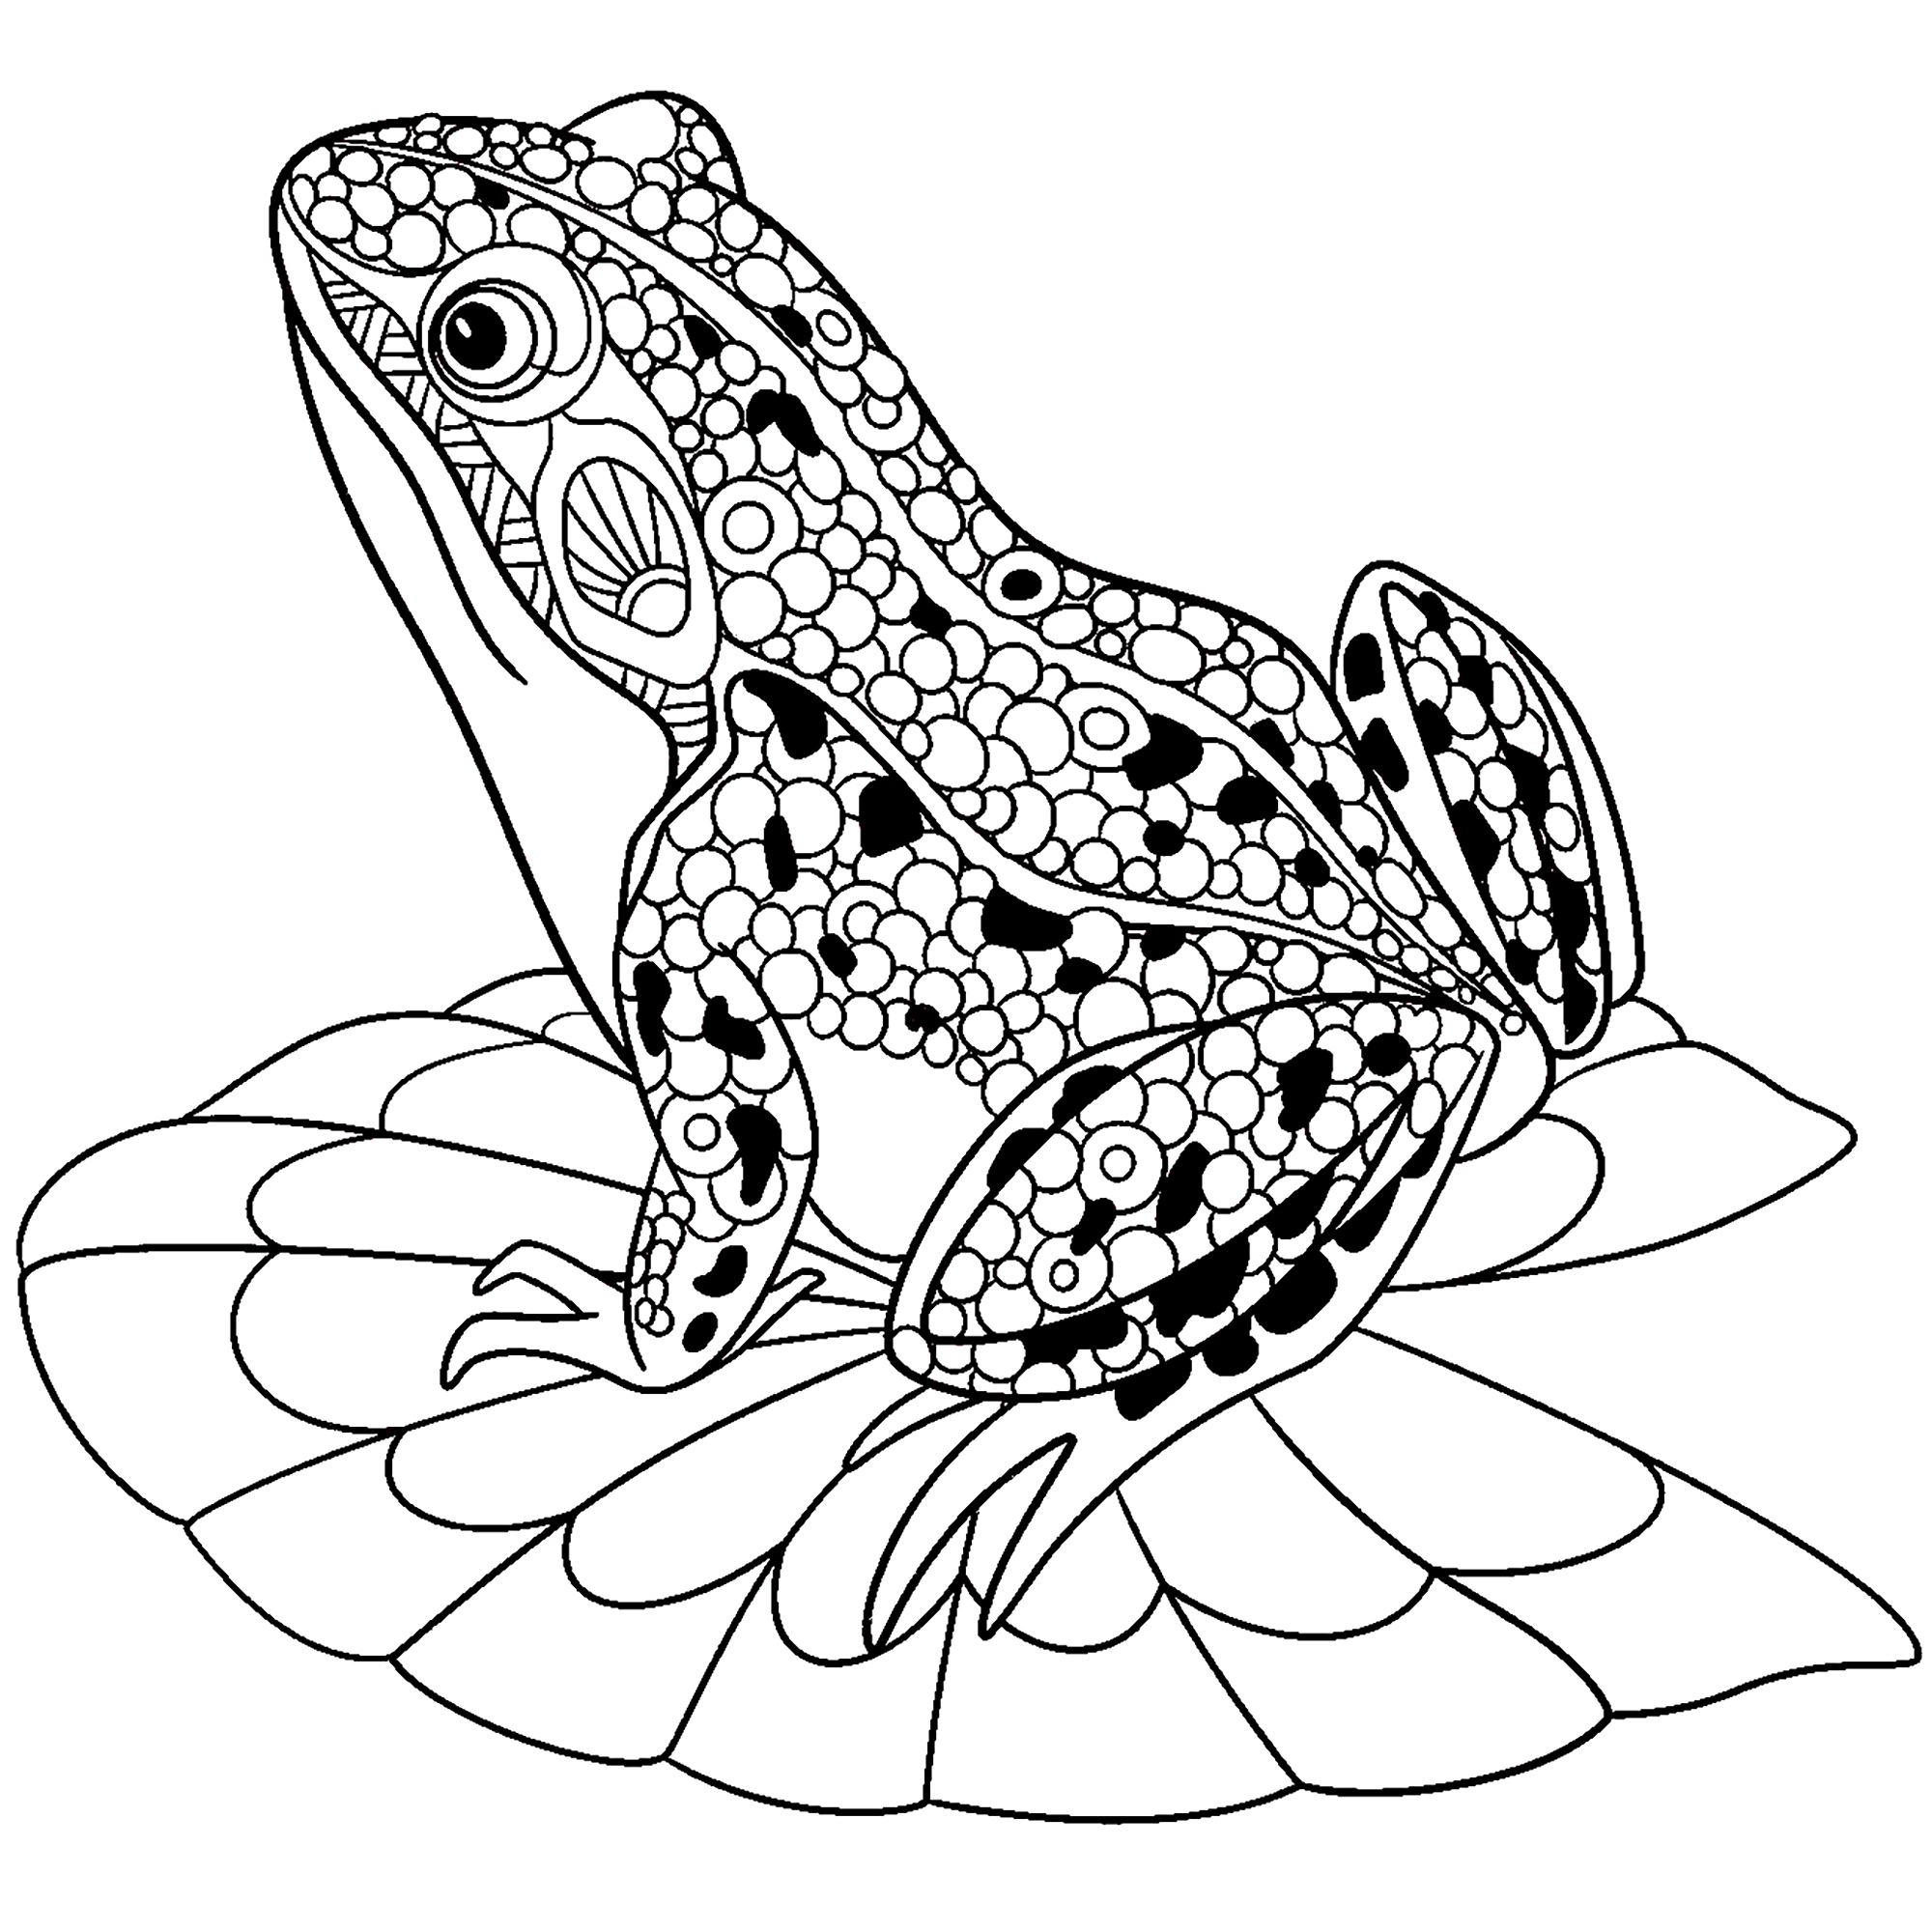 Simple Frogs coloring page to print and color for free